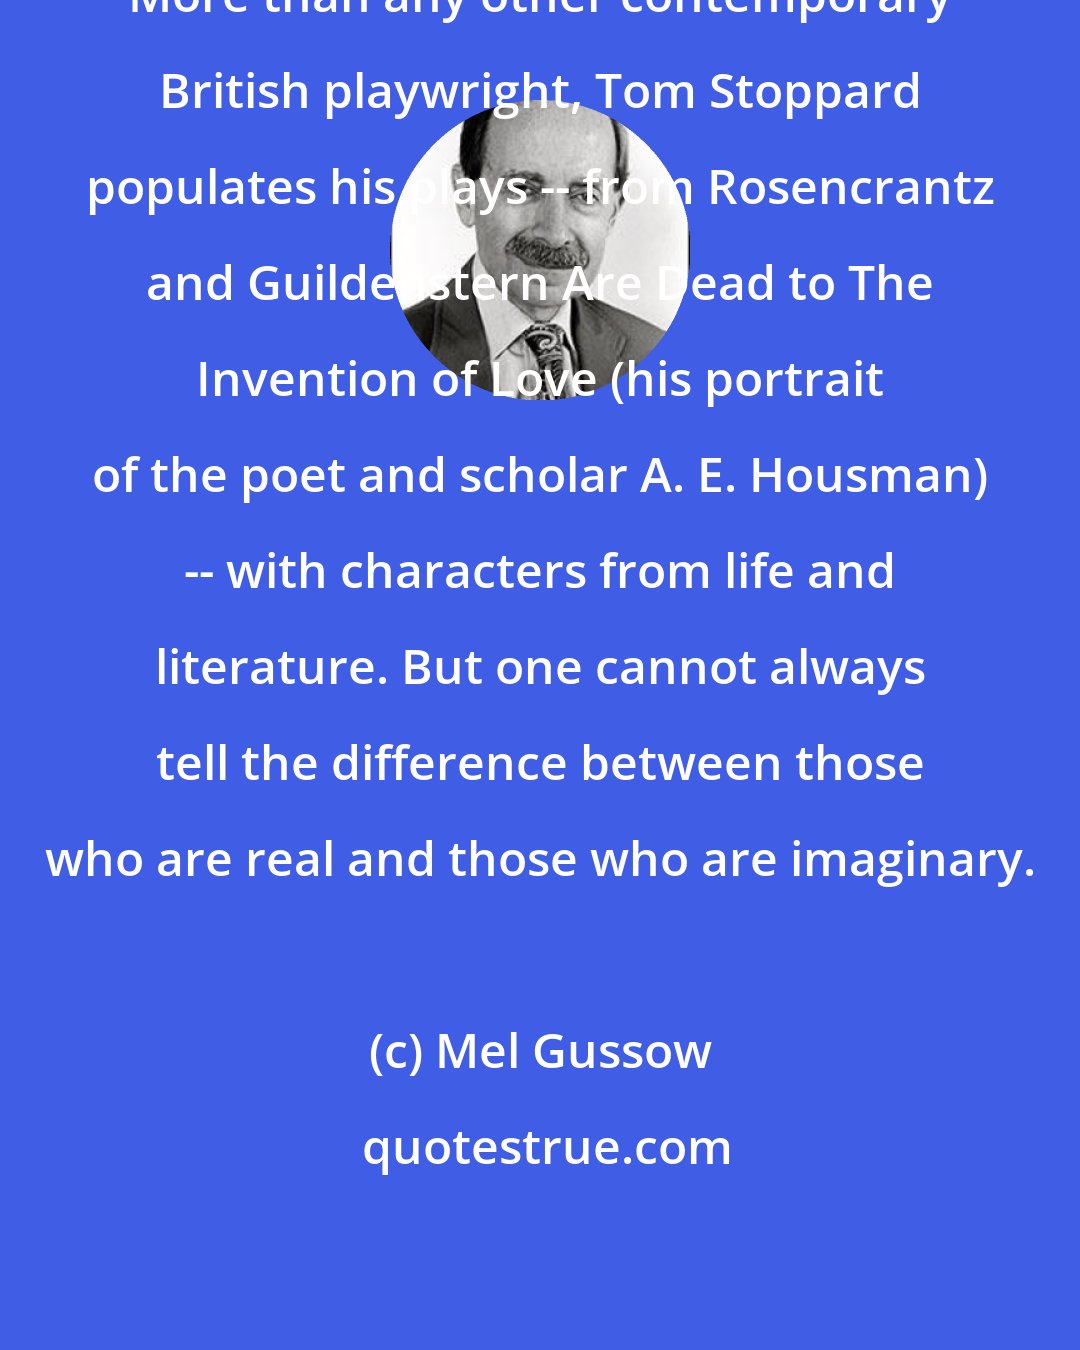 Mel Gussow: More than any other contemporary British playwright, Tom Stoppard populates his plays -- from Rosencrantz and Guildenstern Are Dead to The Invention of Love (his portrait of the poet and scholar A. E. Housman) -- with characters from life and literature. But one cannot always tell the difference between those who are real and those who are imaginary.